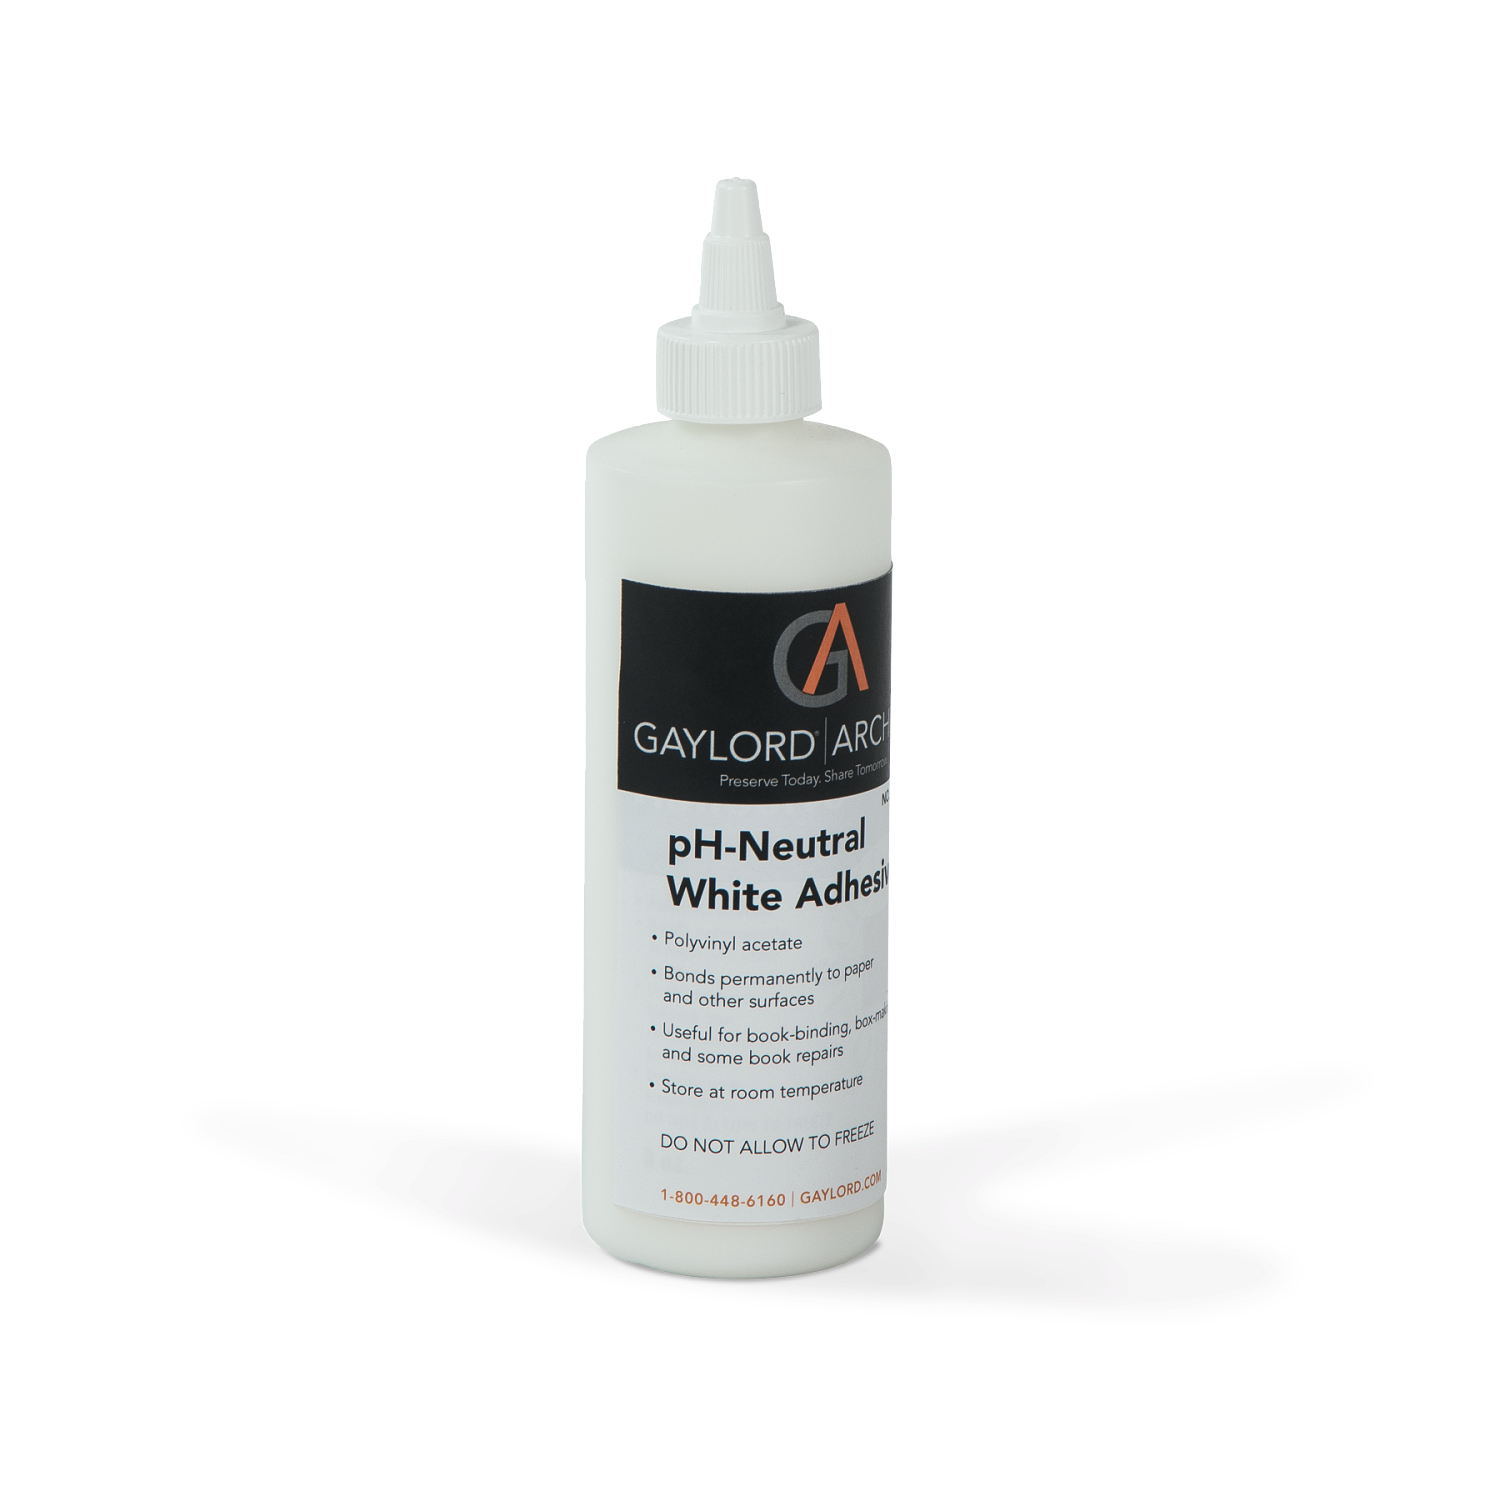 GCP Products Neutral Pva Adhesive, Archival Adhesive Art Supplies